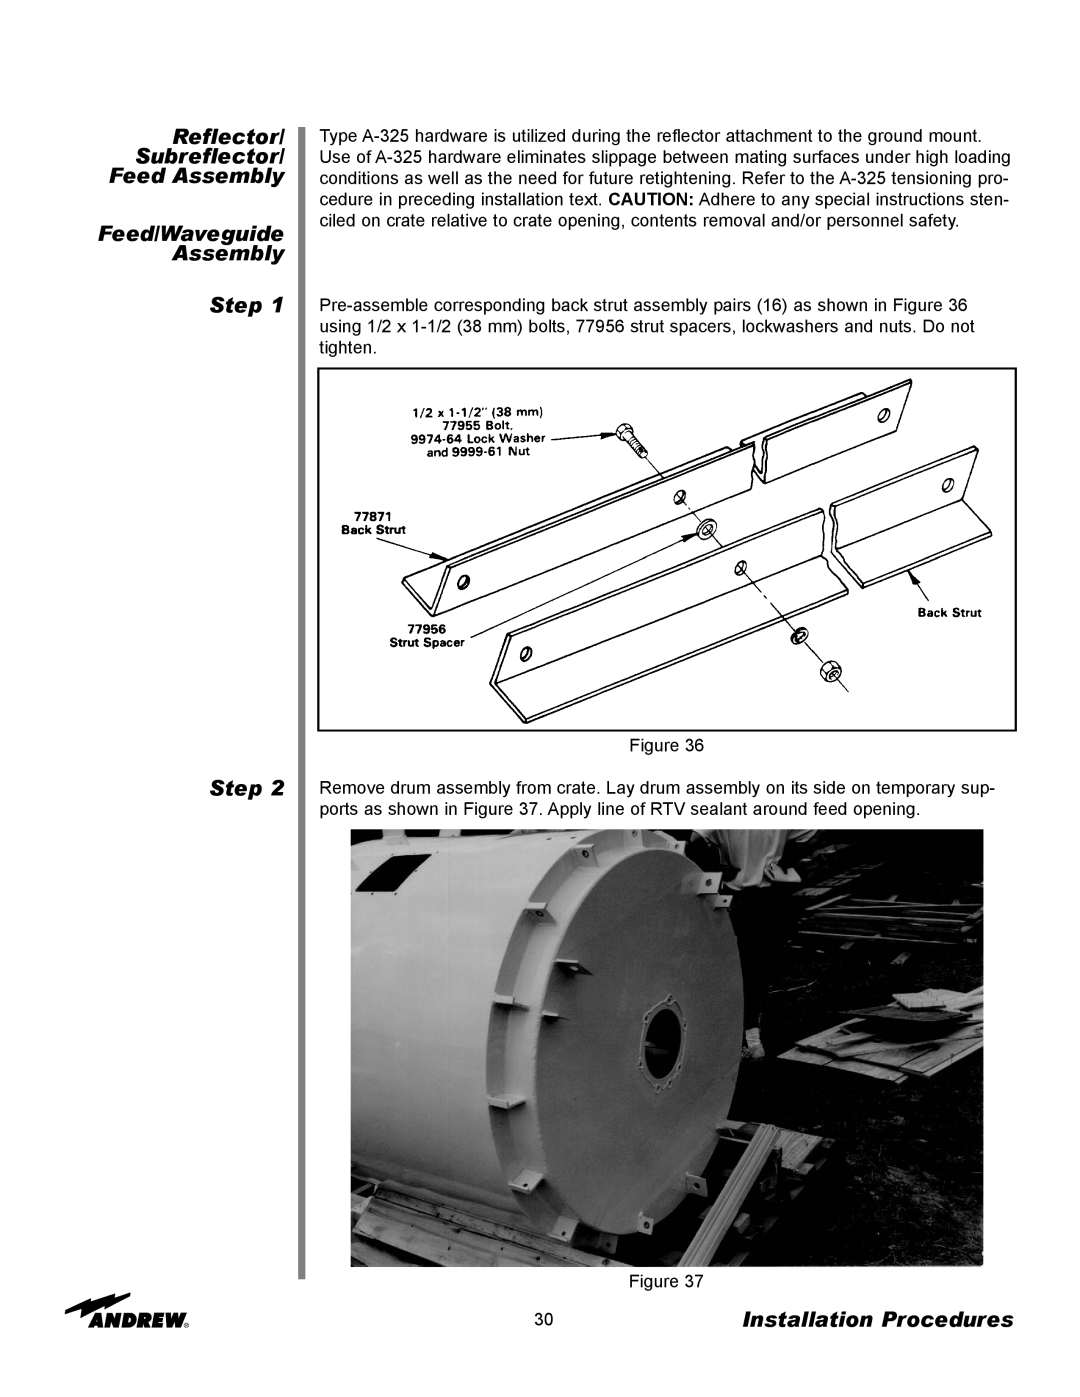 Andrew ES73 manual Reflector Subreflector Feed Assembly, Feed/Waveguide Assembly Step Step, Installation Procedures 